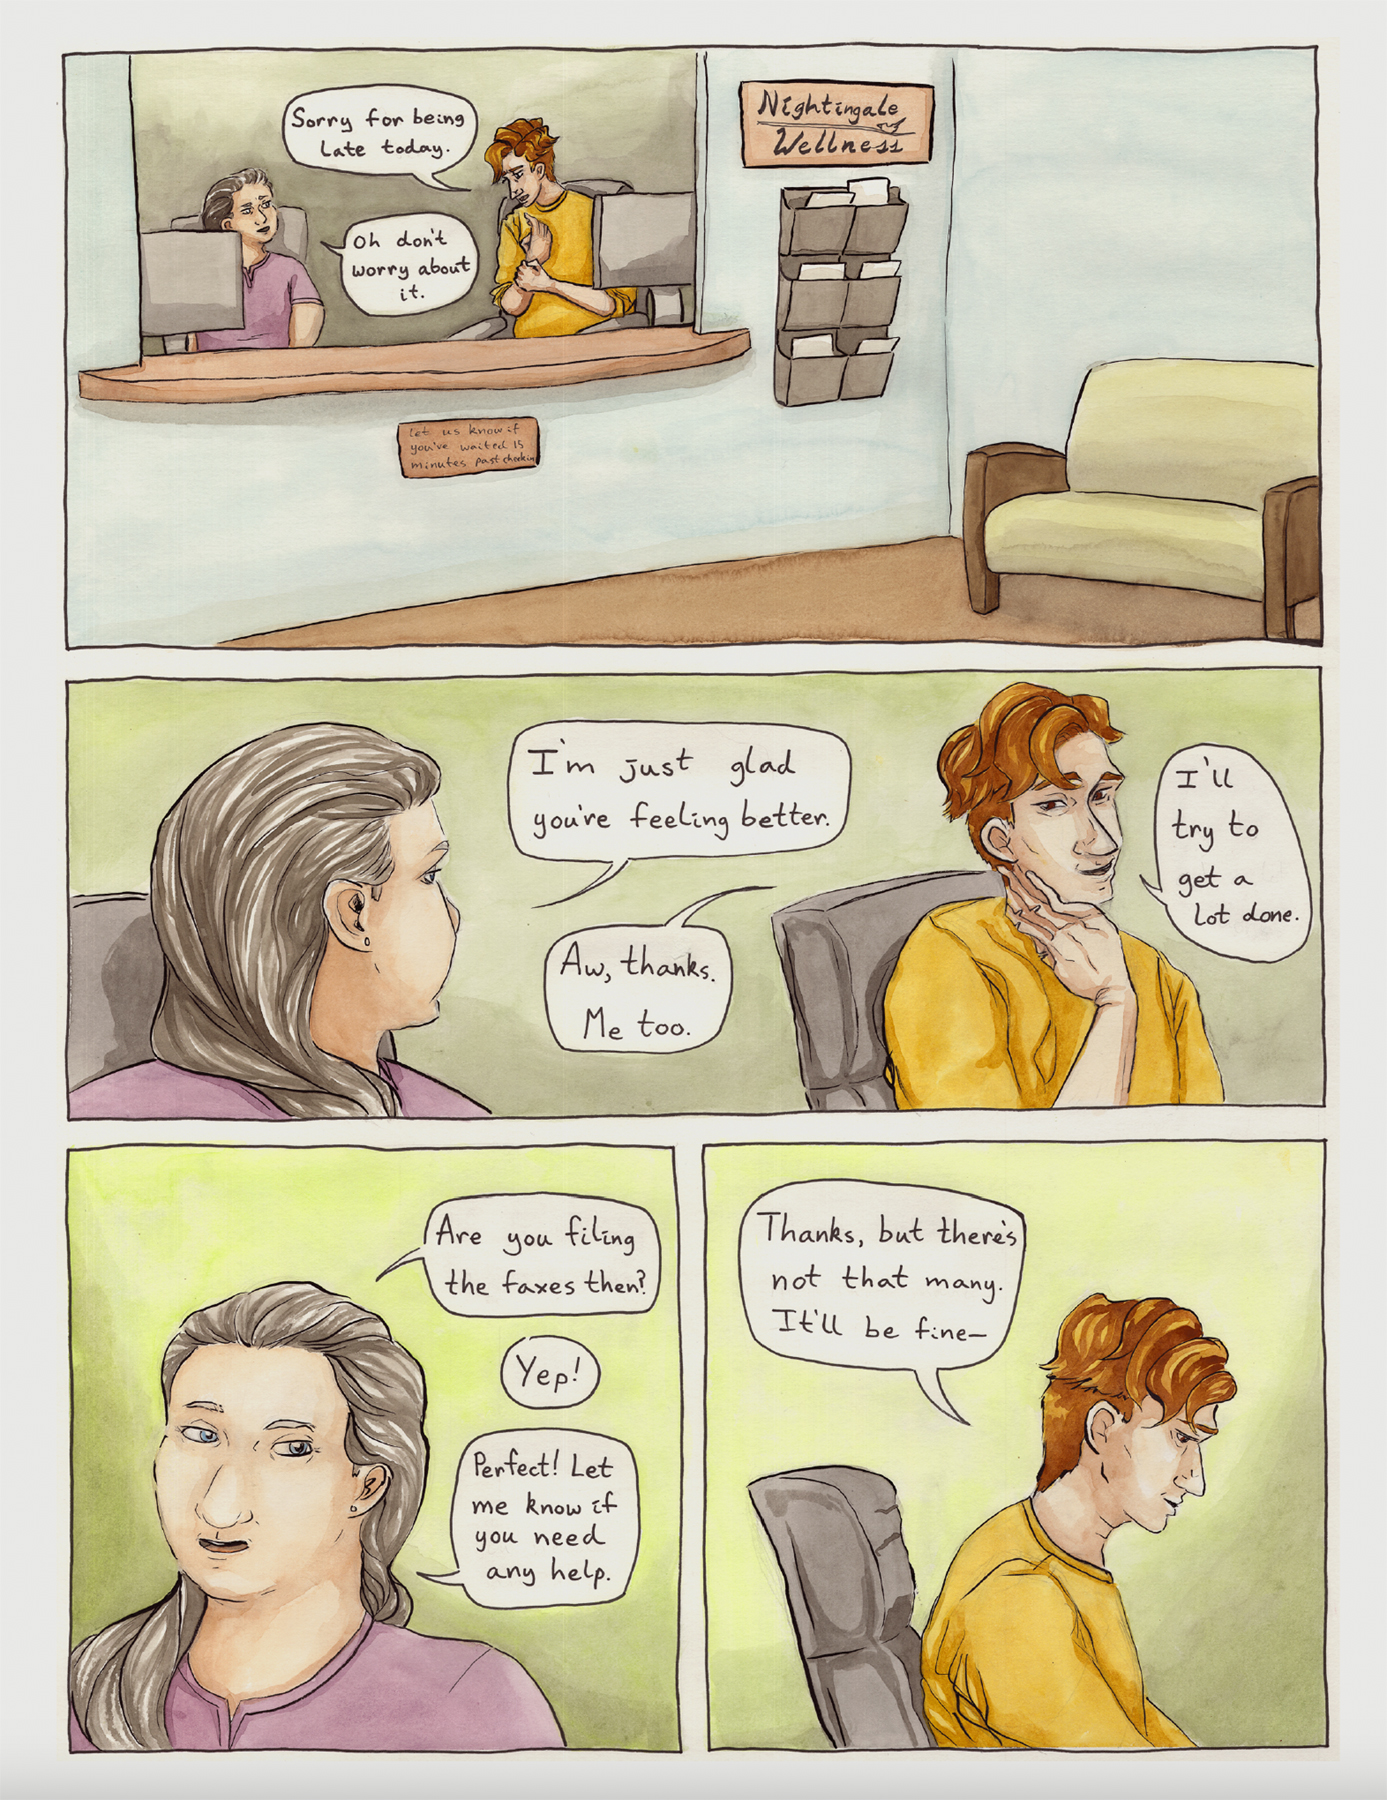 comic page from Against the Floor. Main character is at work talking to coworker. They are filing faxes. Image courtesy of Daniell Stromanthe